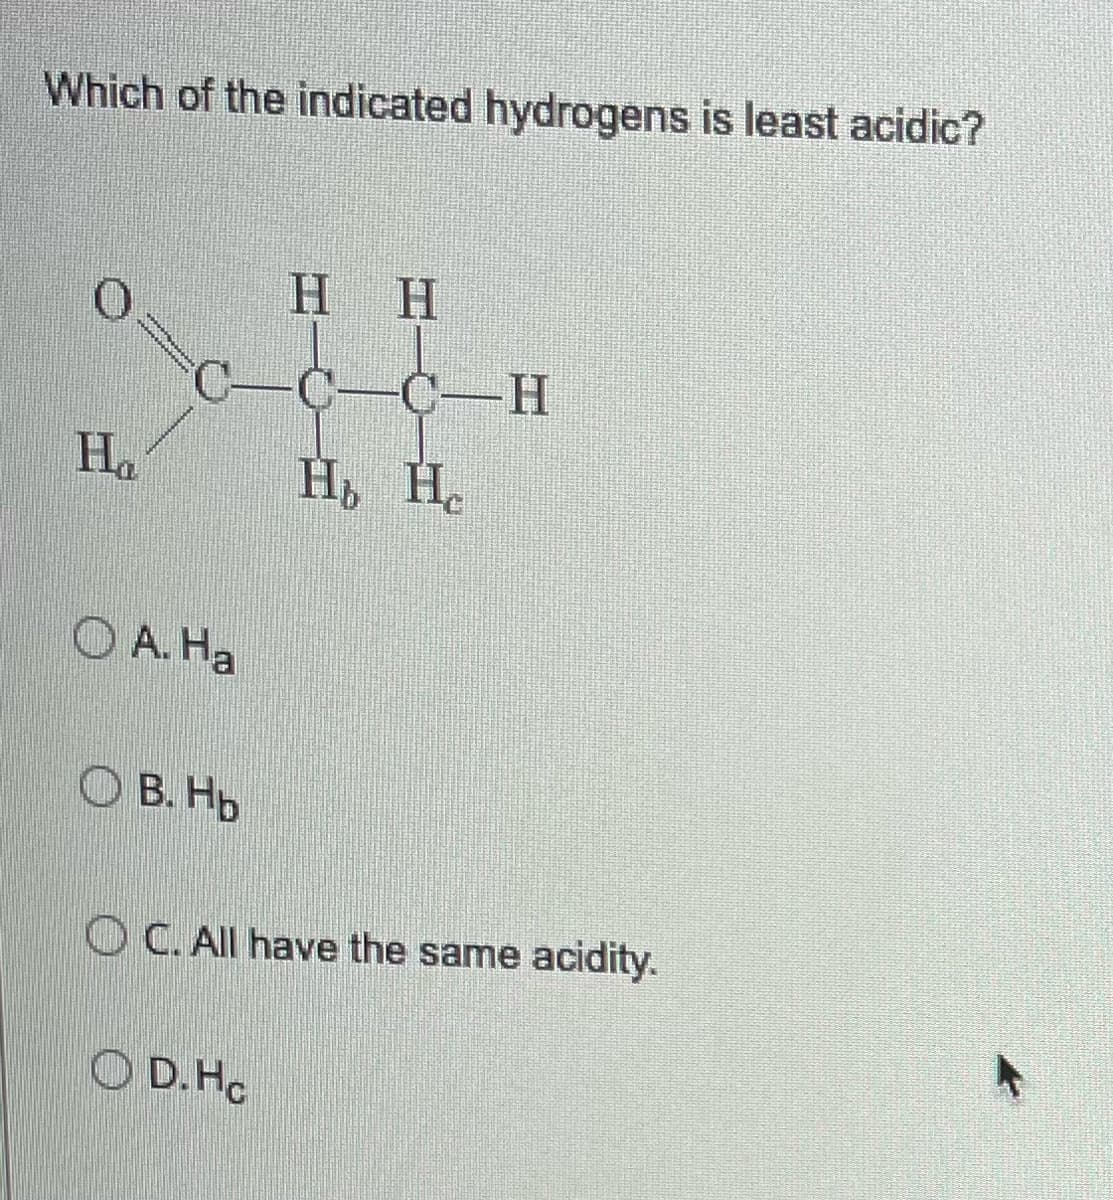 Which of the indicated hydrogens is least acidic?
О
Η Η
C-H
4
На
wwwwww www.
нь He
O B. Hb
OC. All have the same acidity.
OD. Ho
O A. Ha